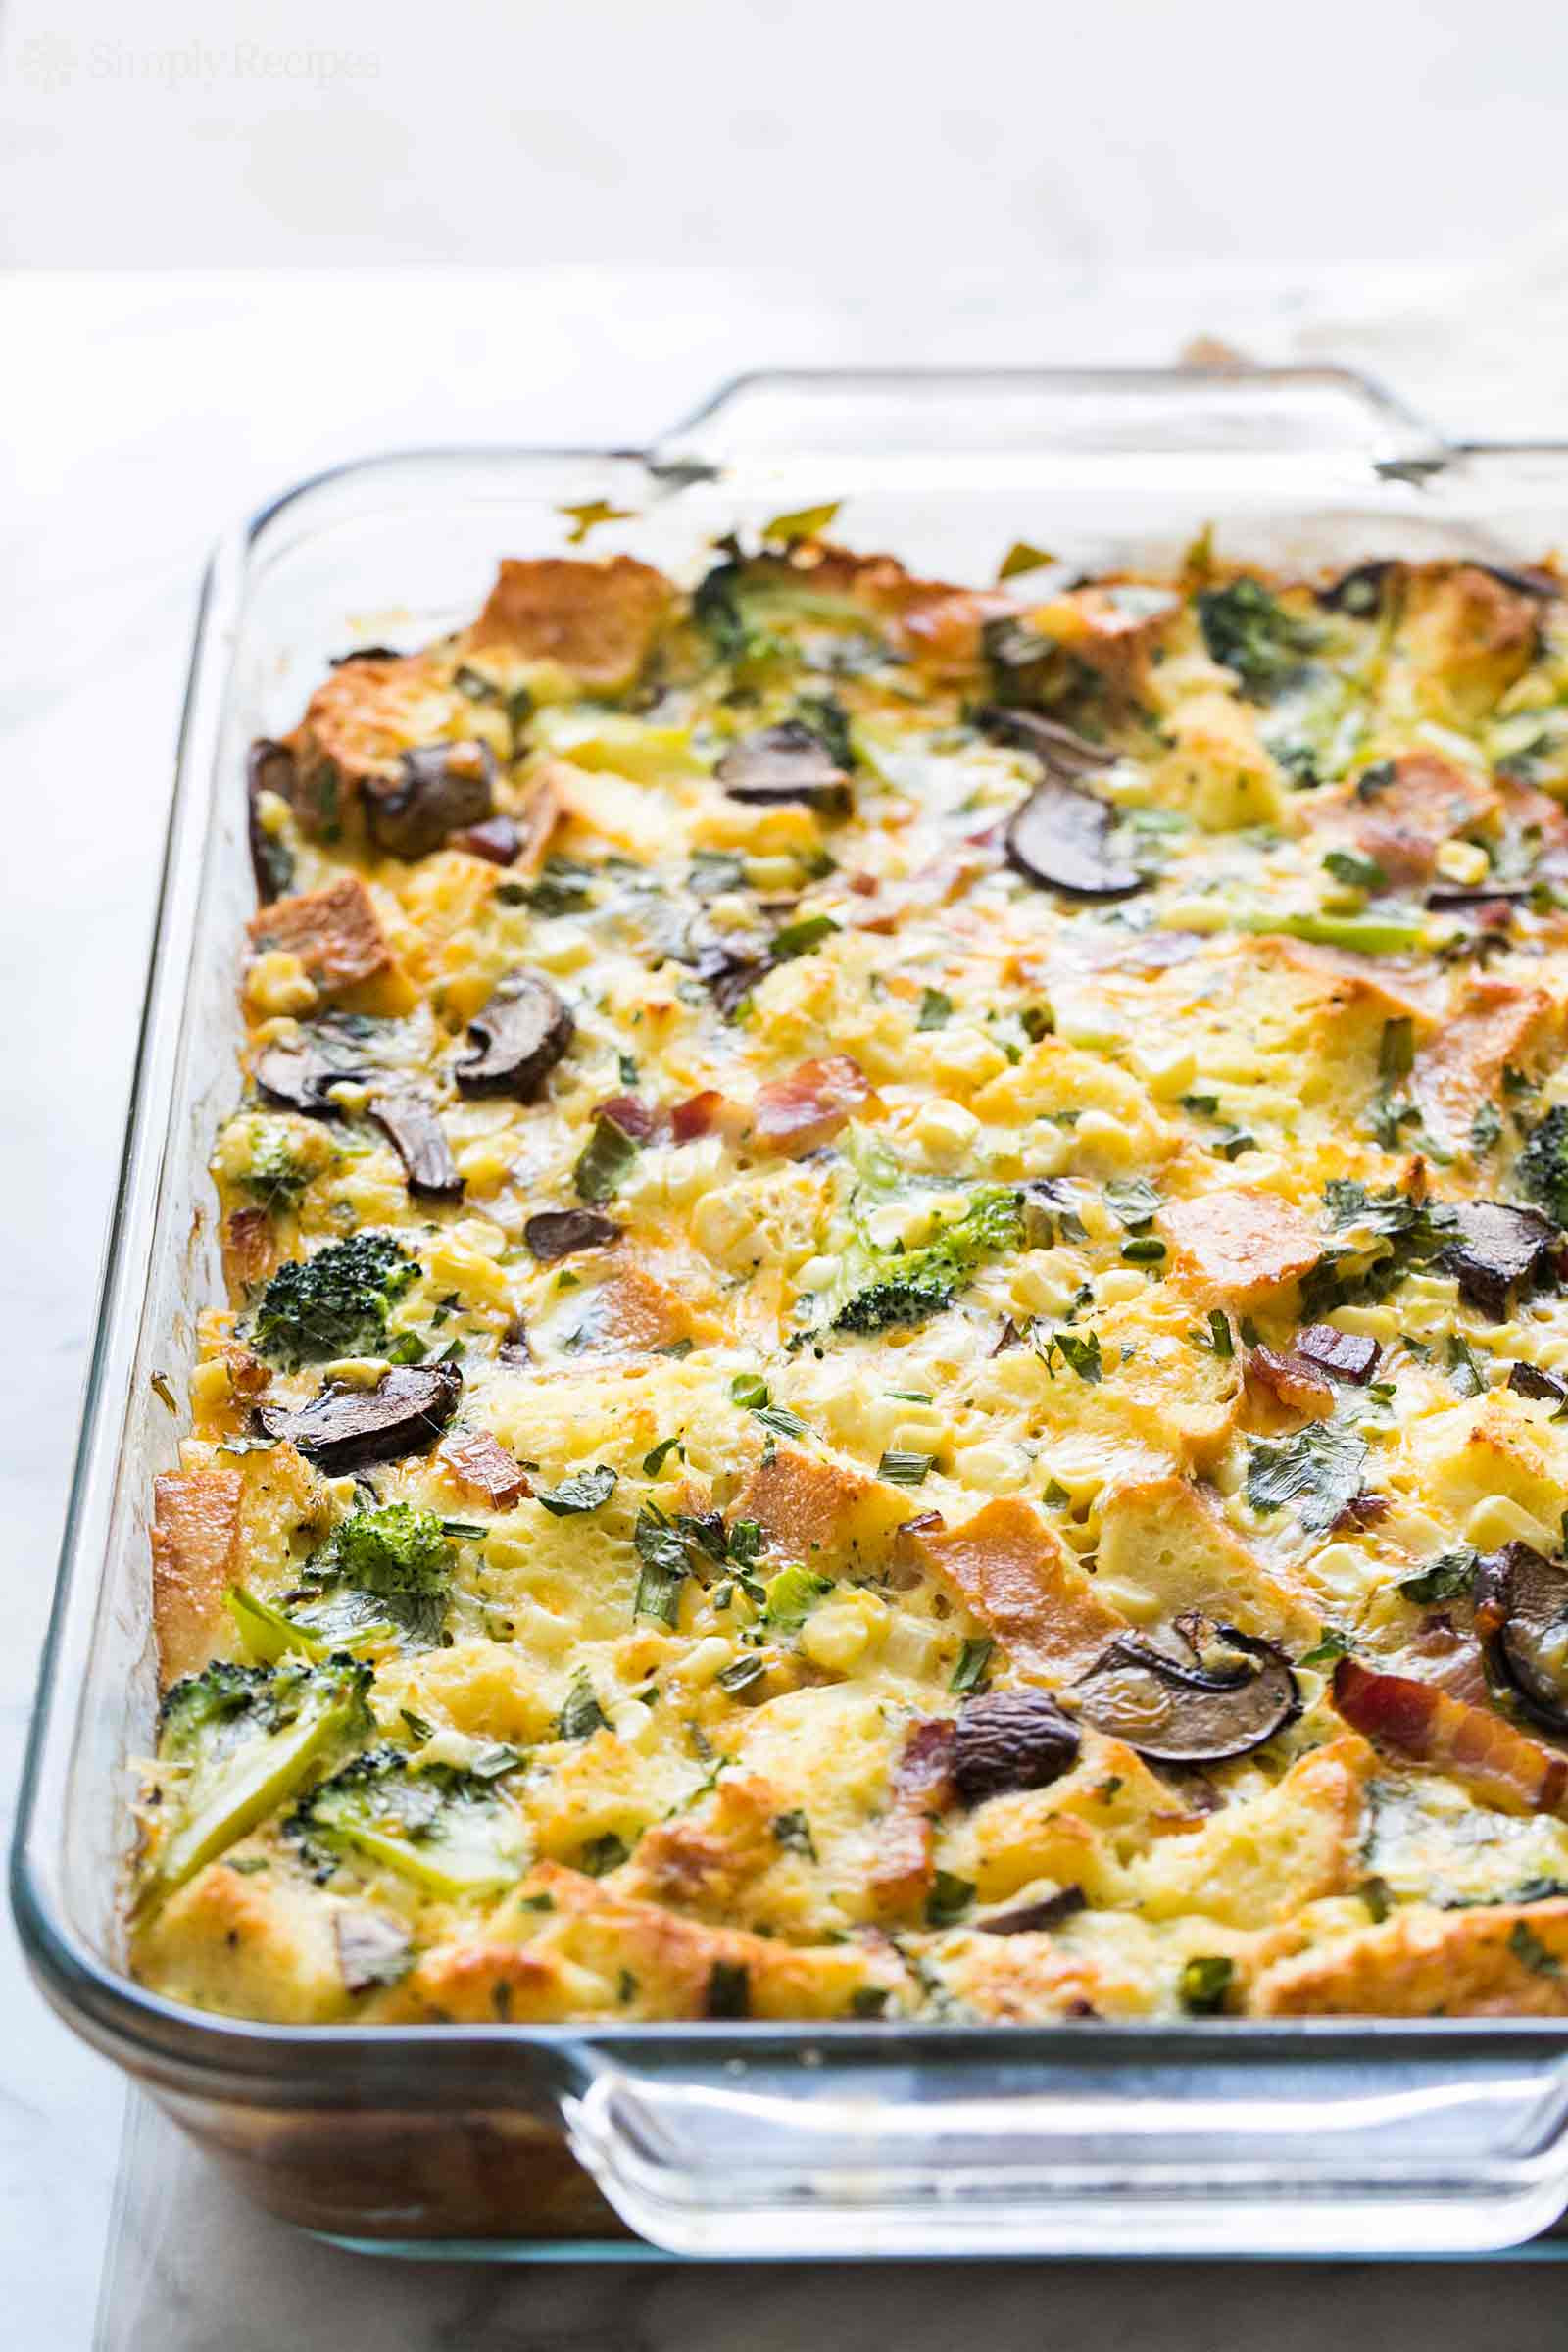 Breakfast Casserole With Bread Slices
 egg bake with bread slices